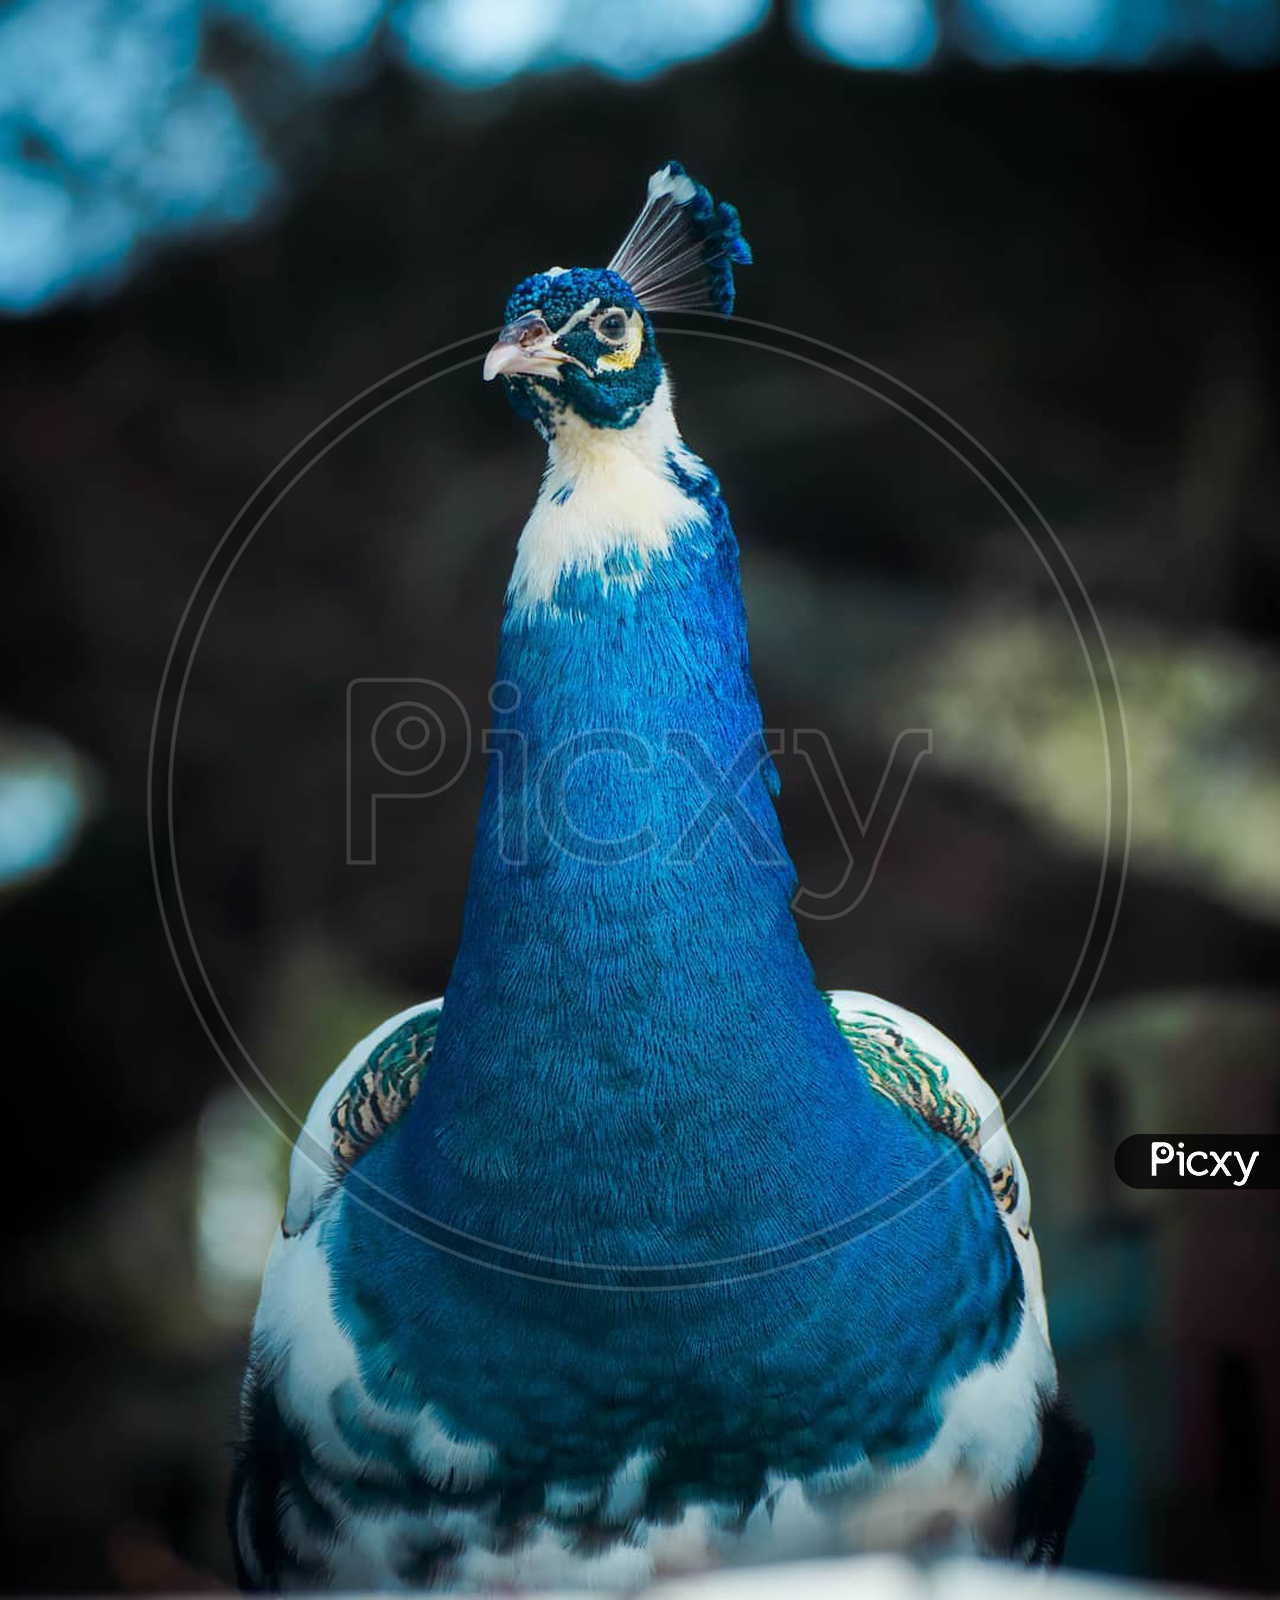 Be like a peacock and dance with all of your beauty